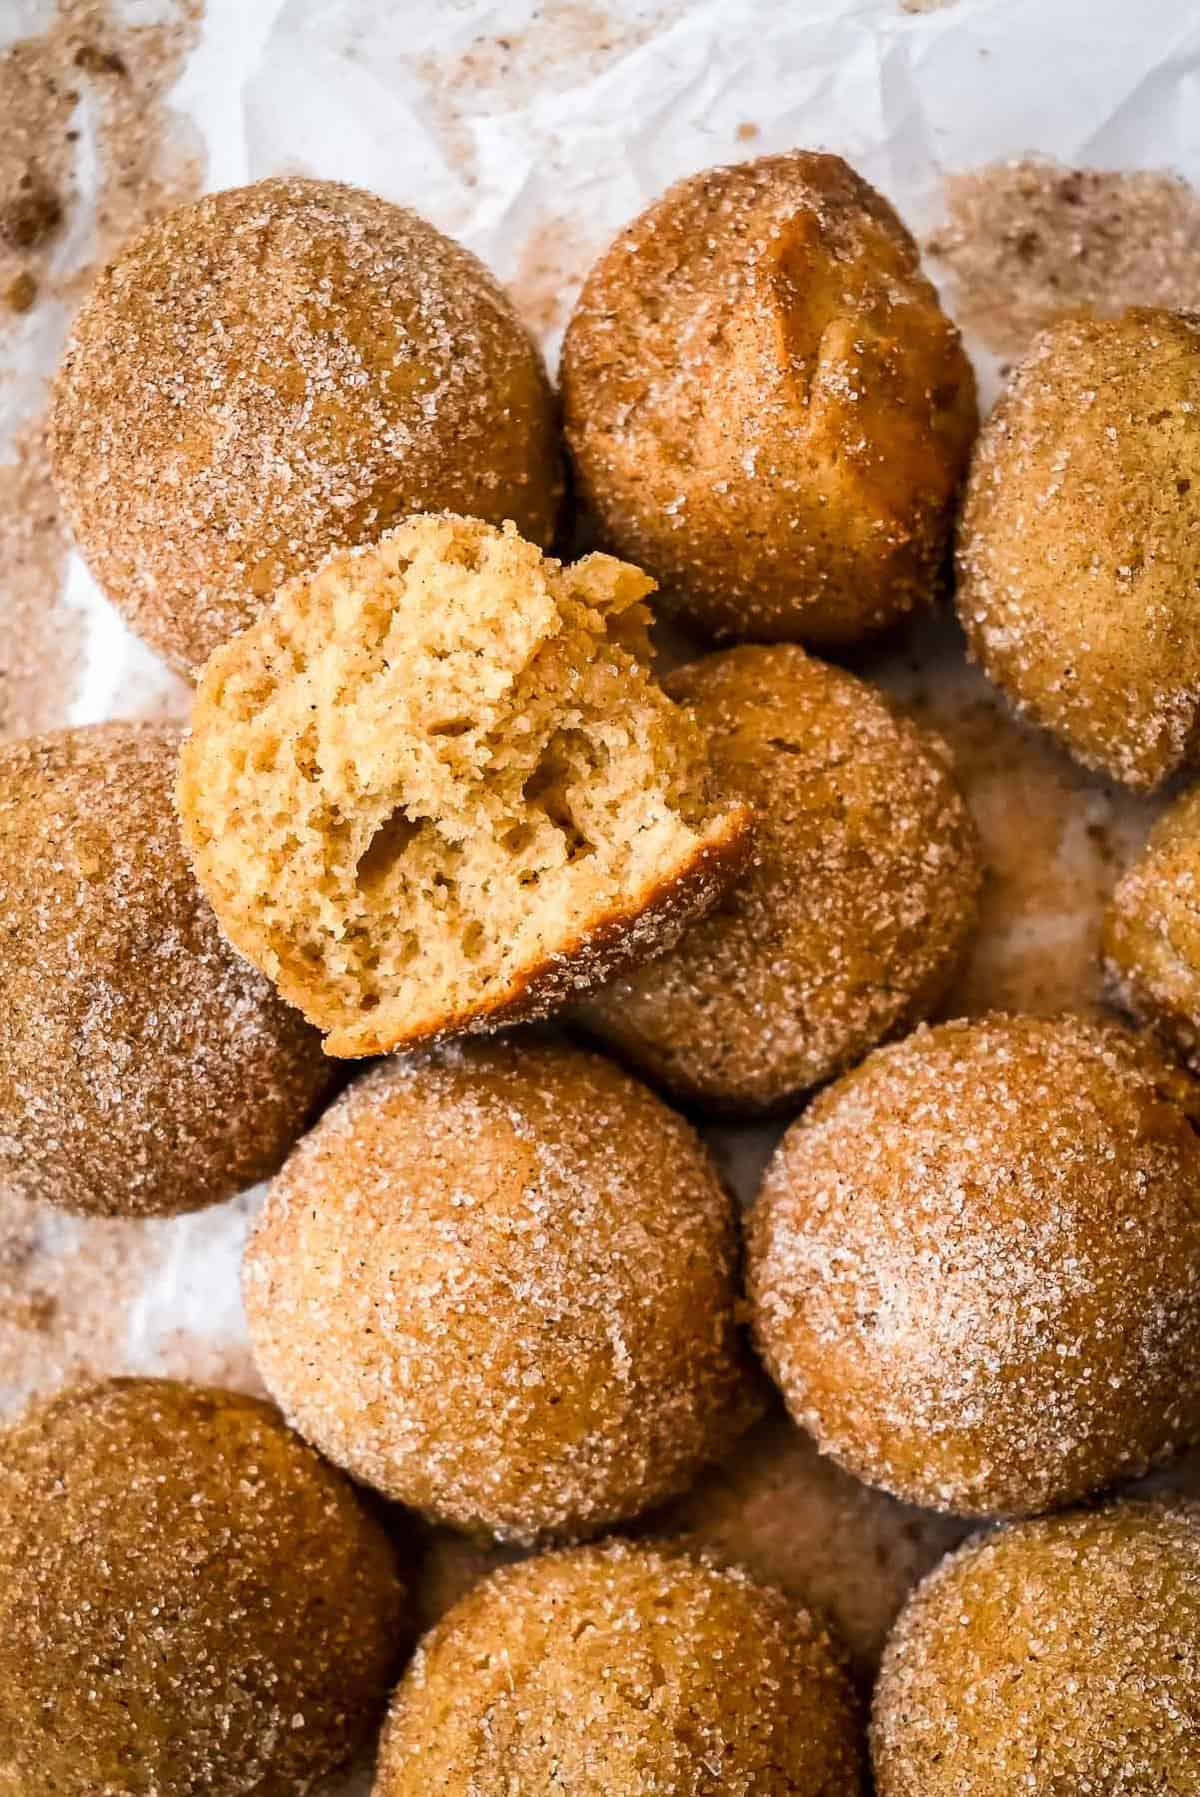 bite shot of apple cider donut holes in a pile on white parchment paper with cinnamon sugar.